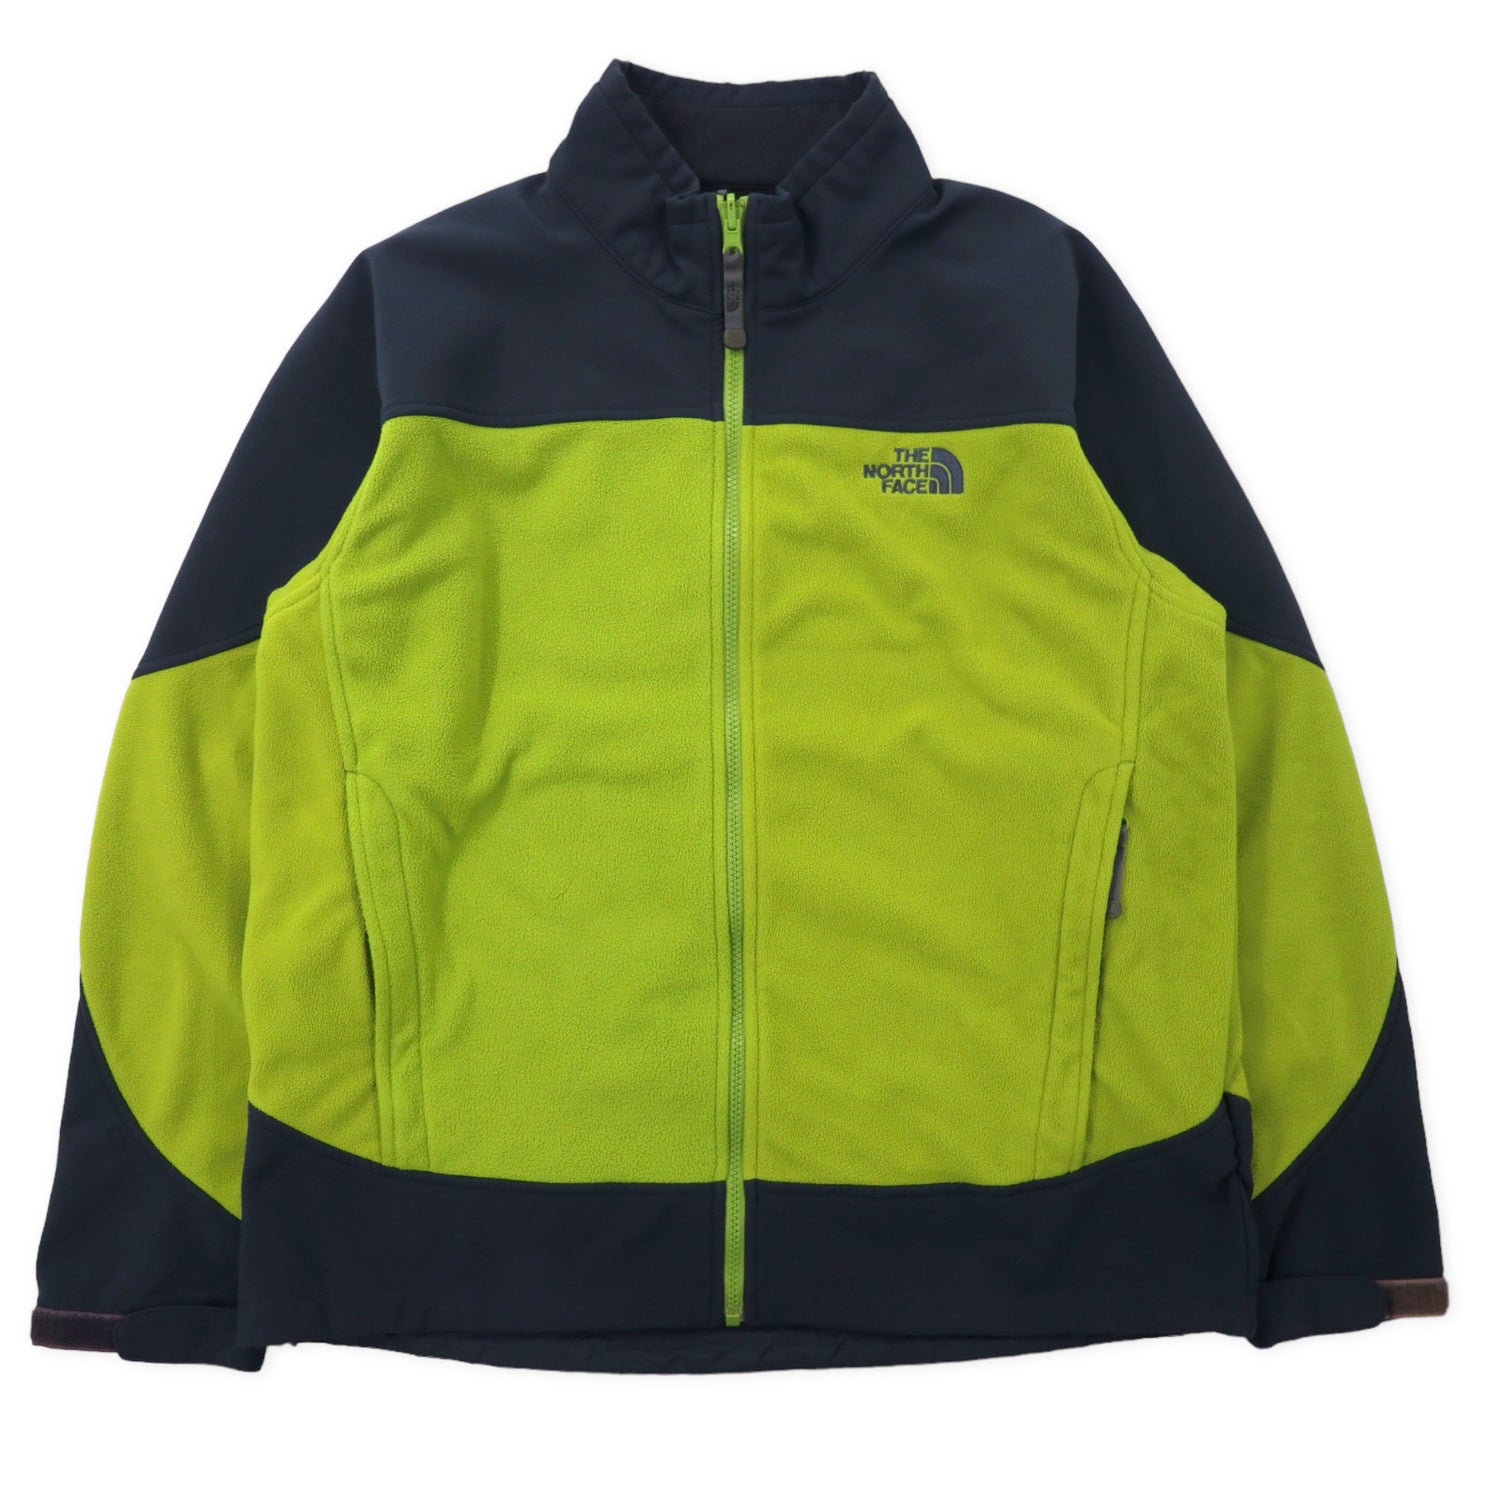 THE NORTH FACE Wind stopper FLEECE Jacket L Green Gray Polyester